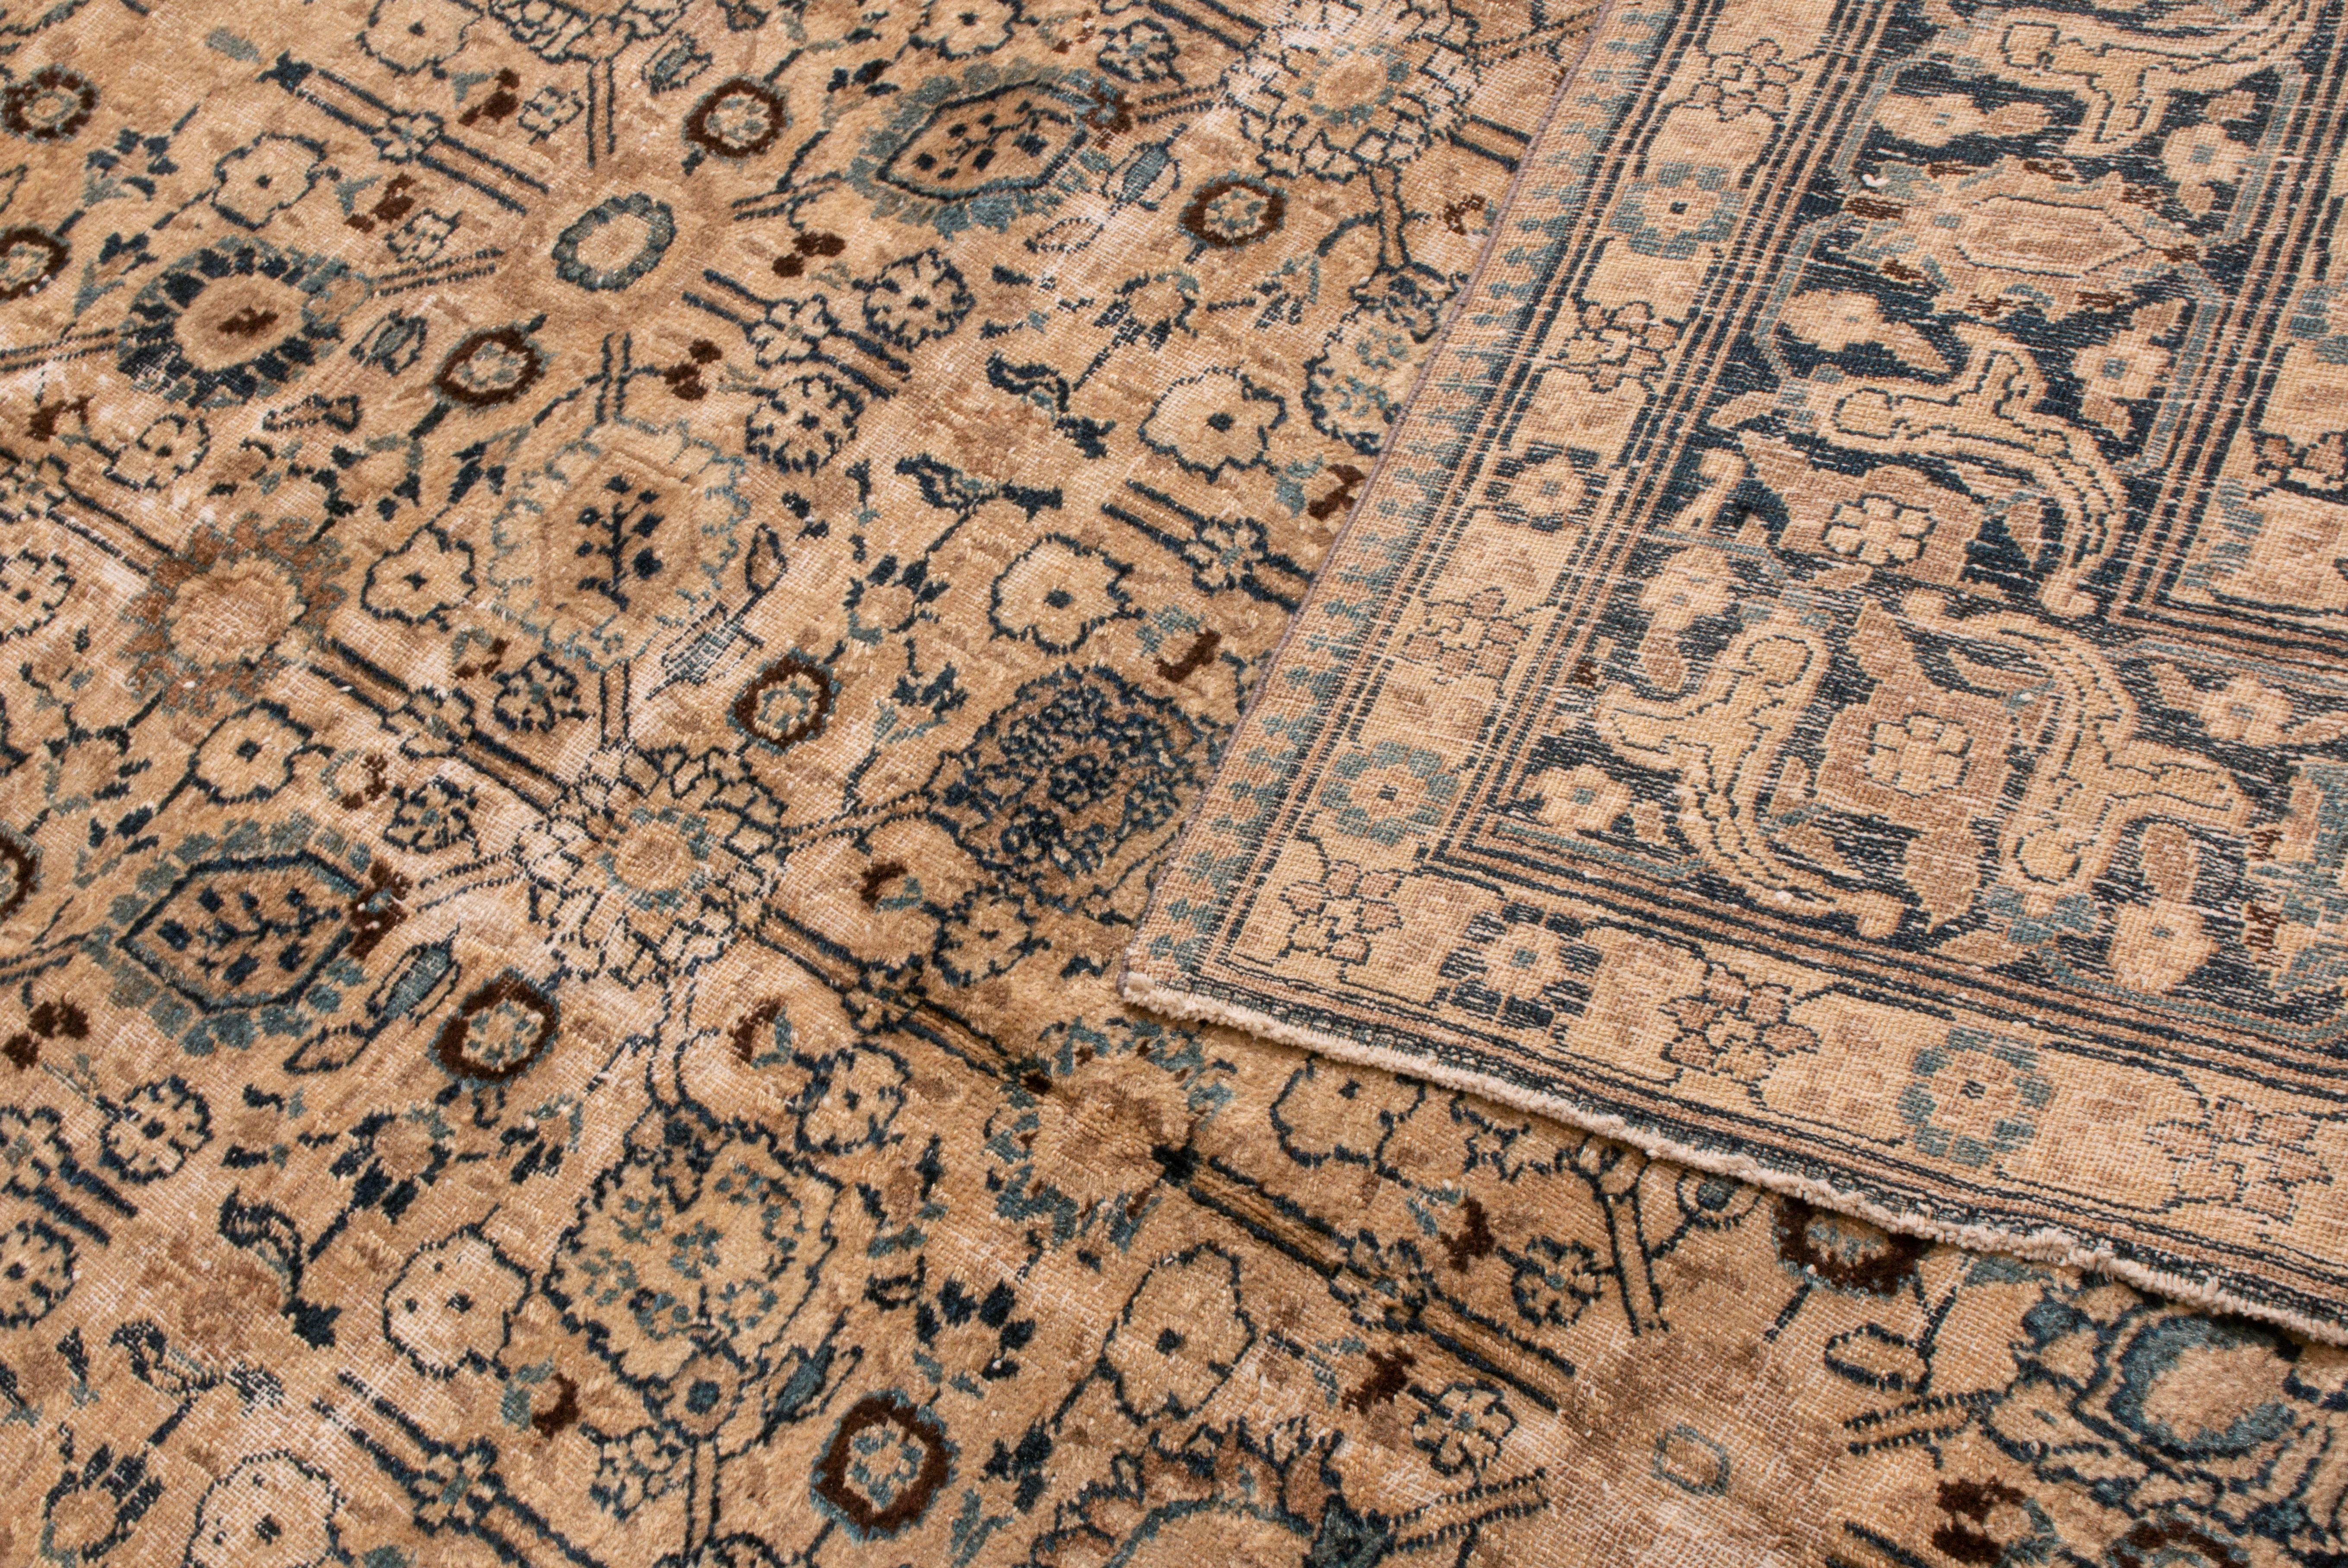 Hand-Knotted Antique Doroksh Brown and Blue Wool Rug with All-Over Floral Pattern